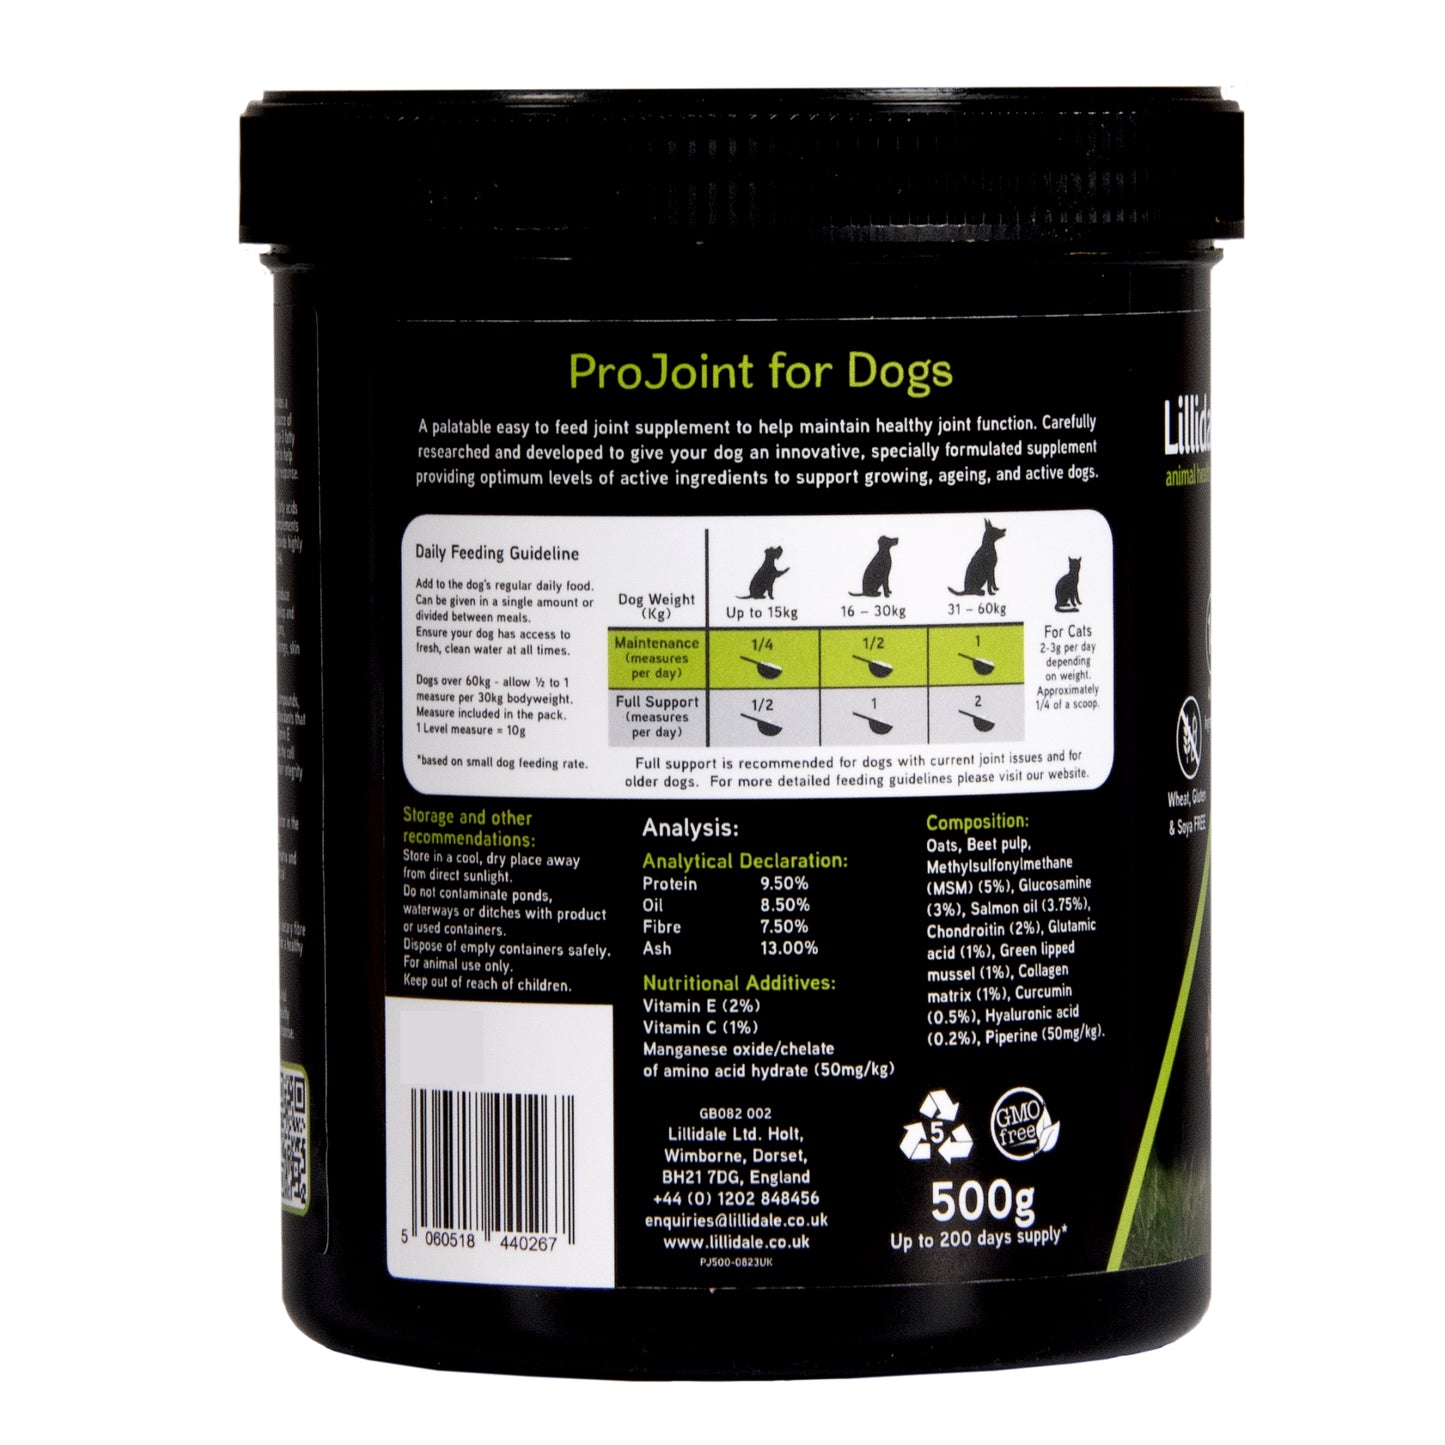 ProJoint for Dogs